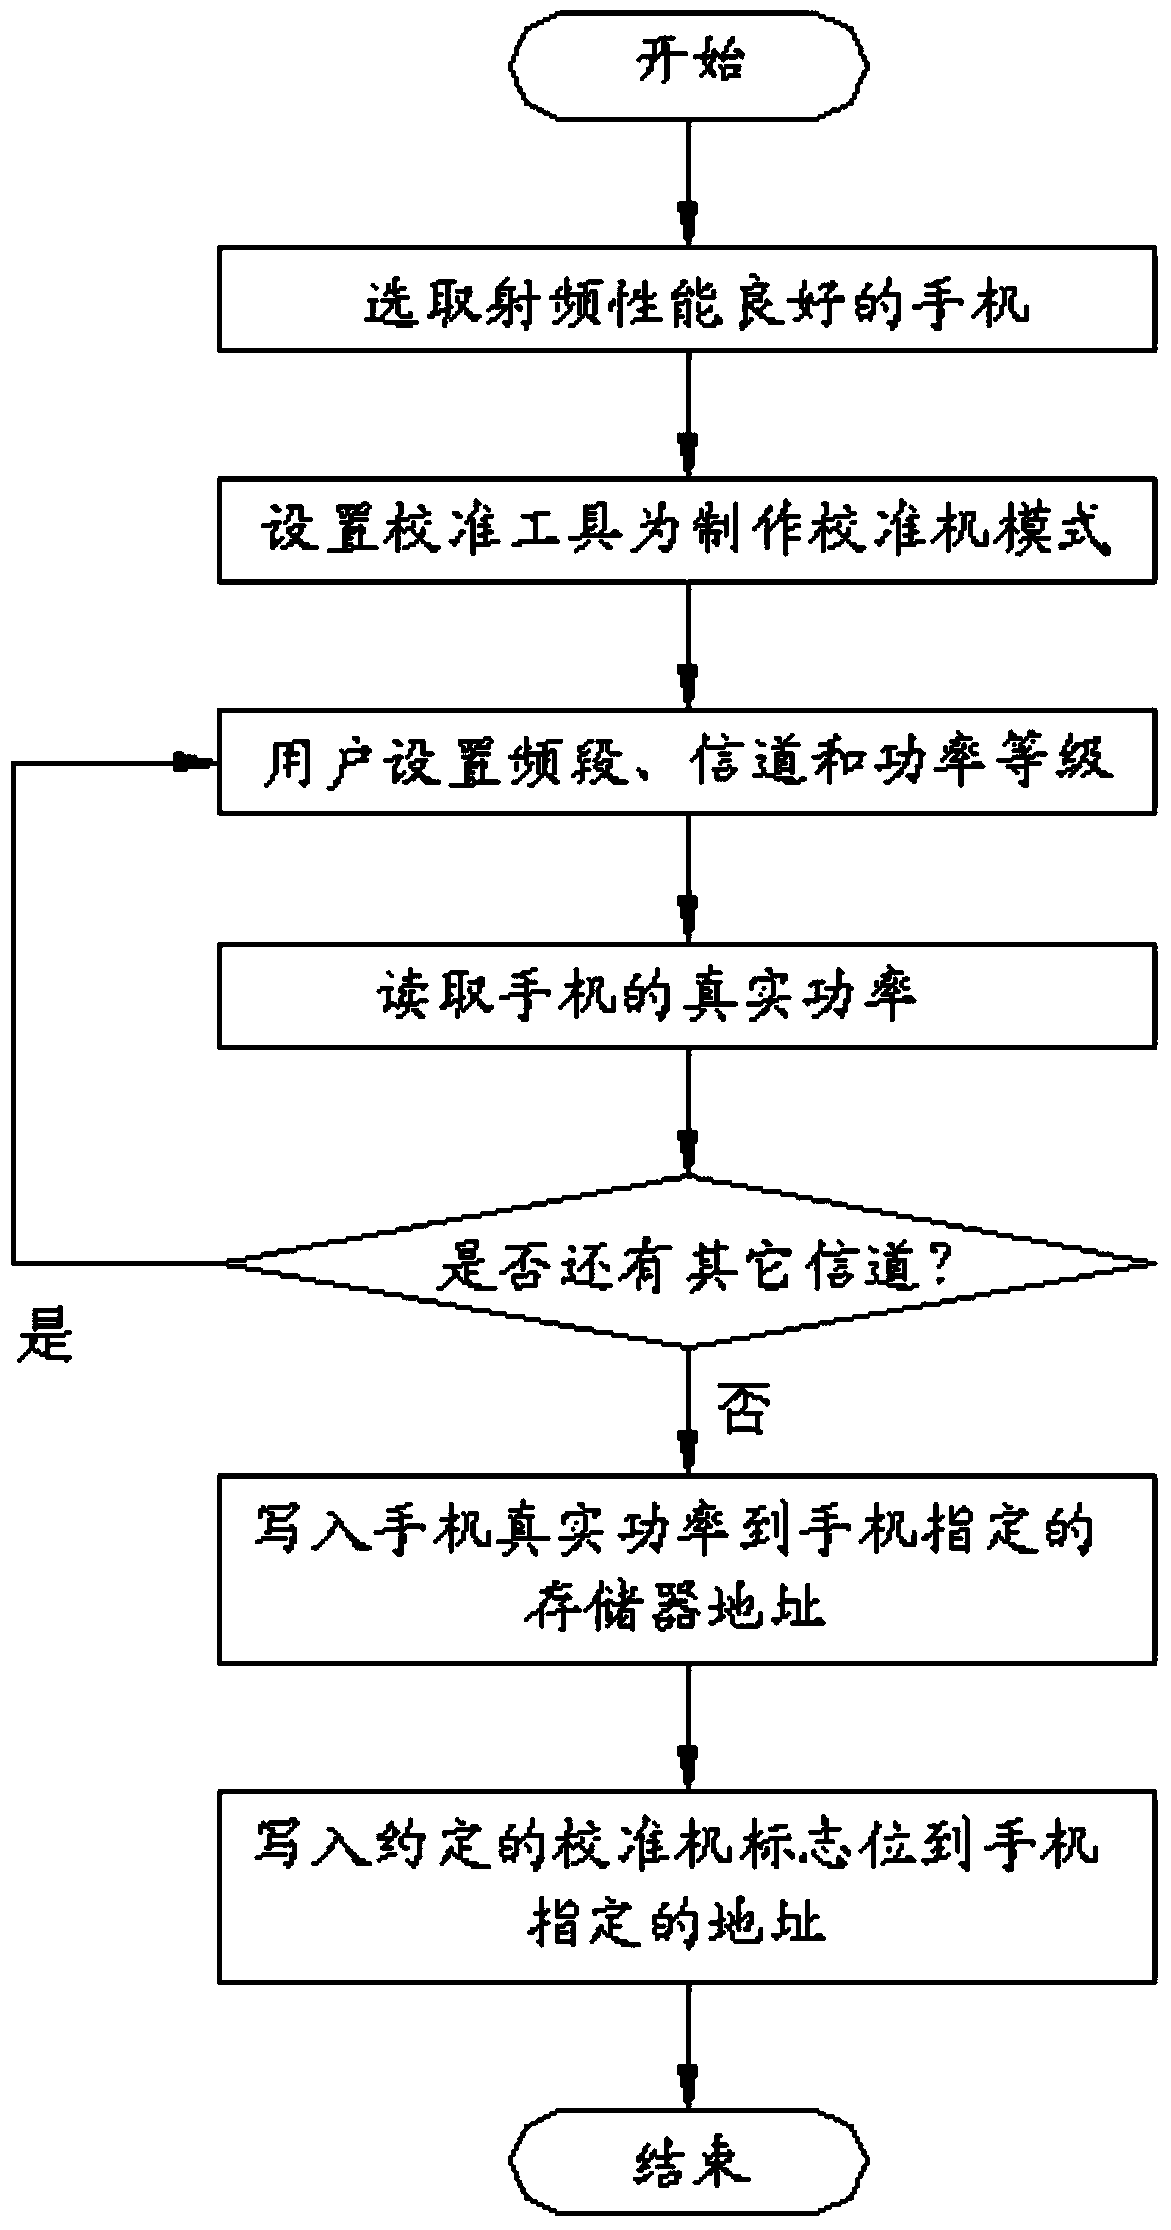 Method and device for automatically calculating compensation for mobile-phone radio frequency testing system